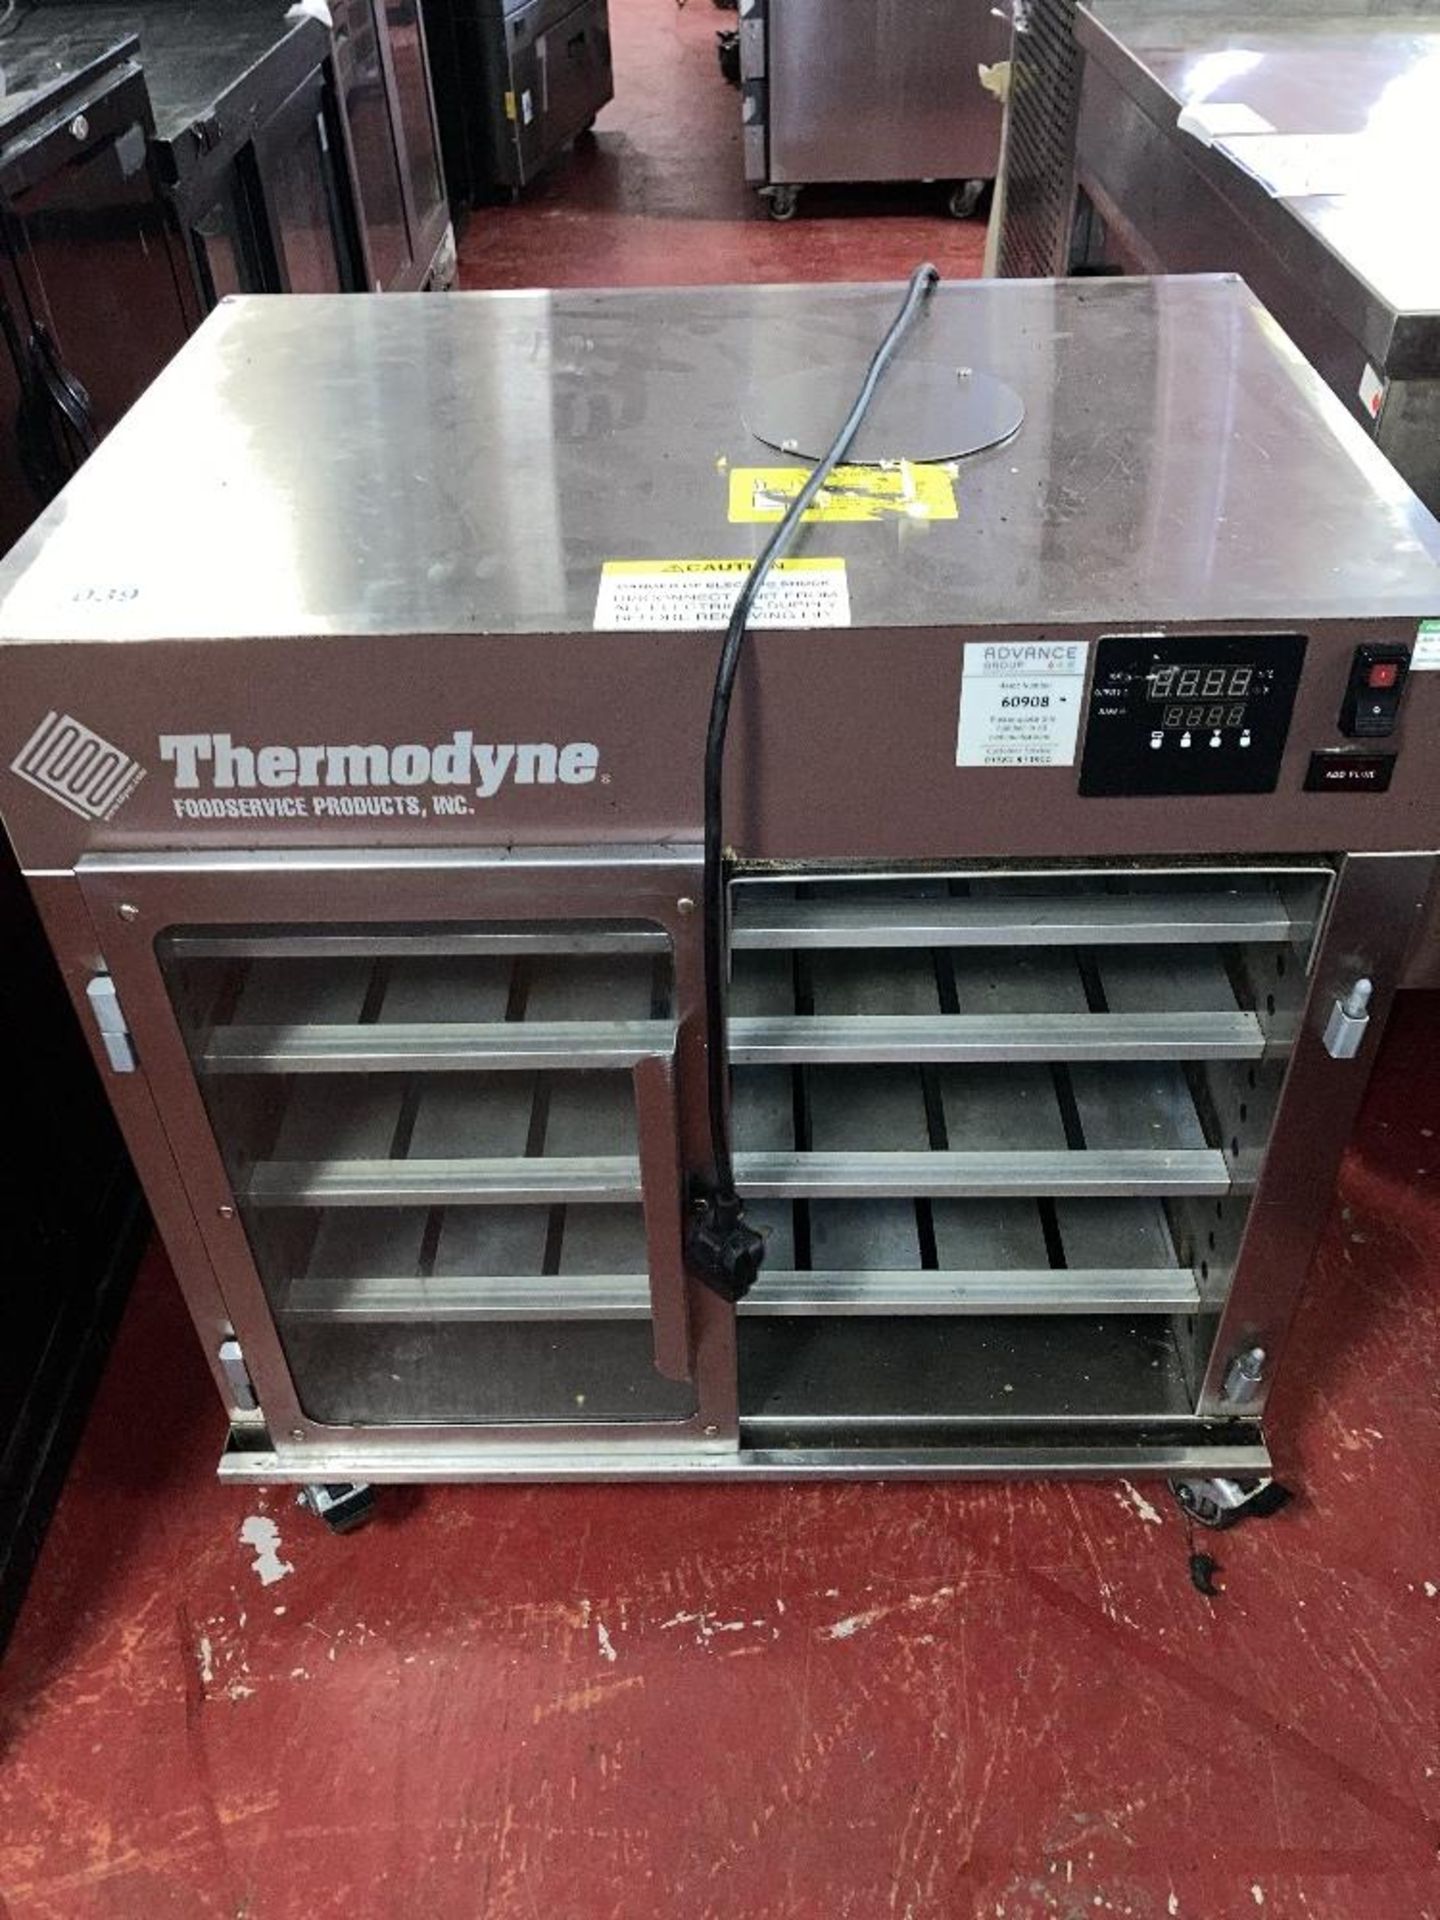 Thermodyne 700CT 2-Door Holding Cabinet (DOM: 2016) - Image 2 of 5